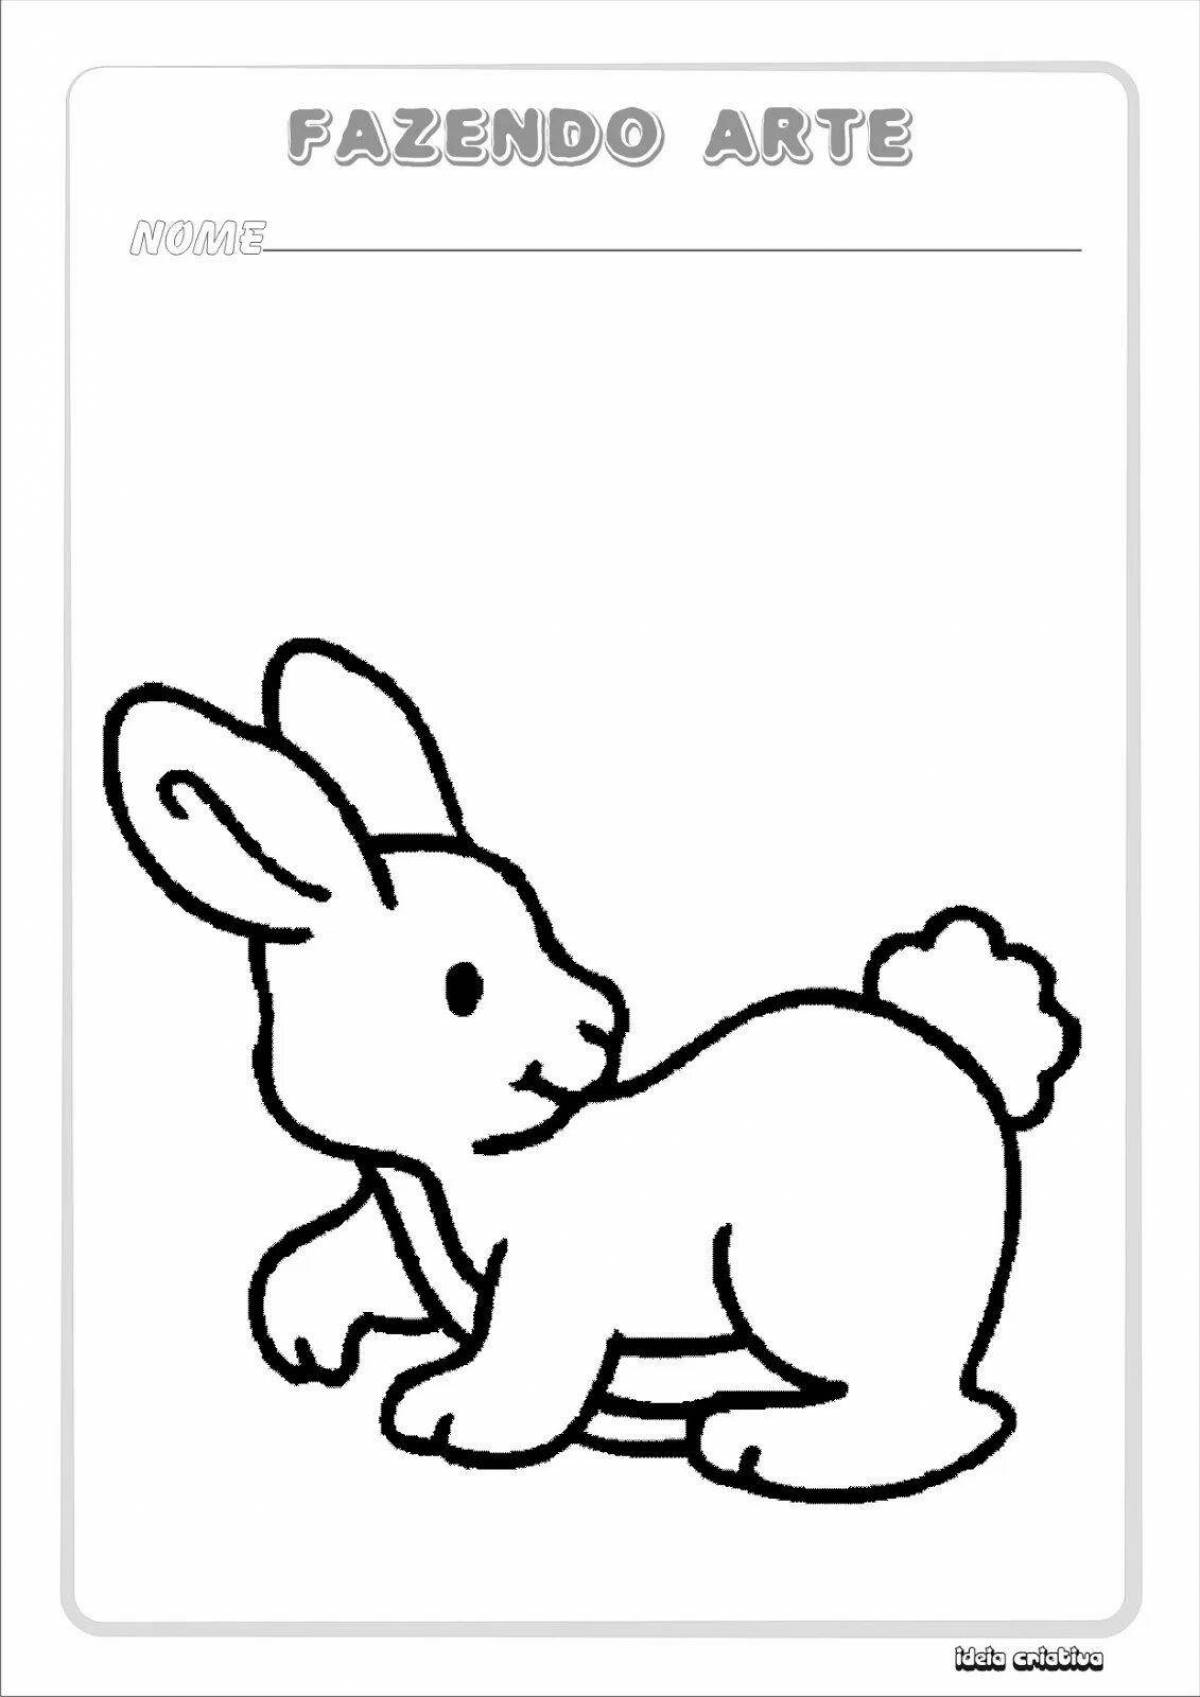 Live coloring hare outline